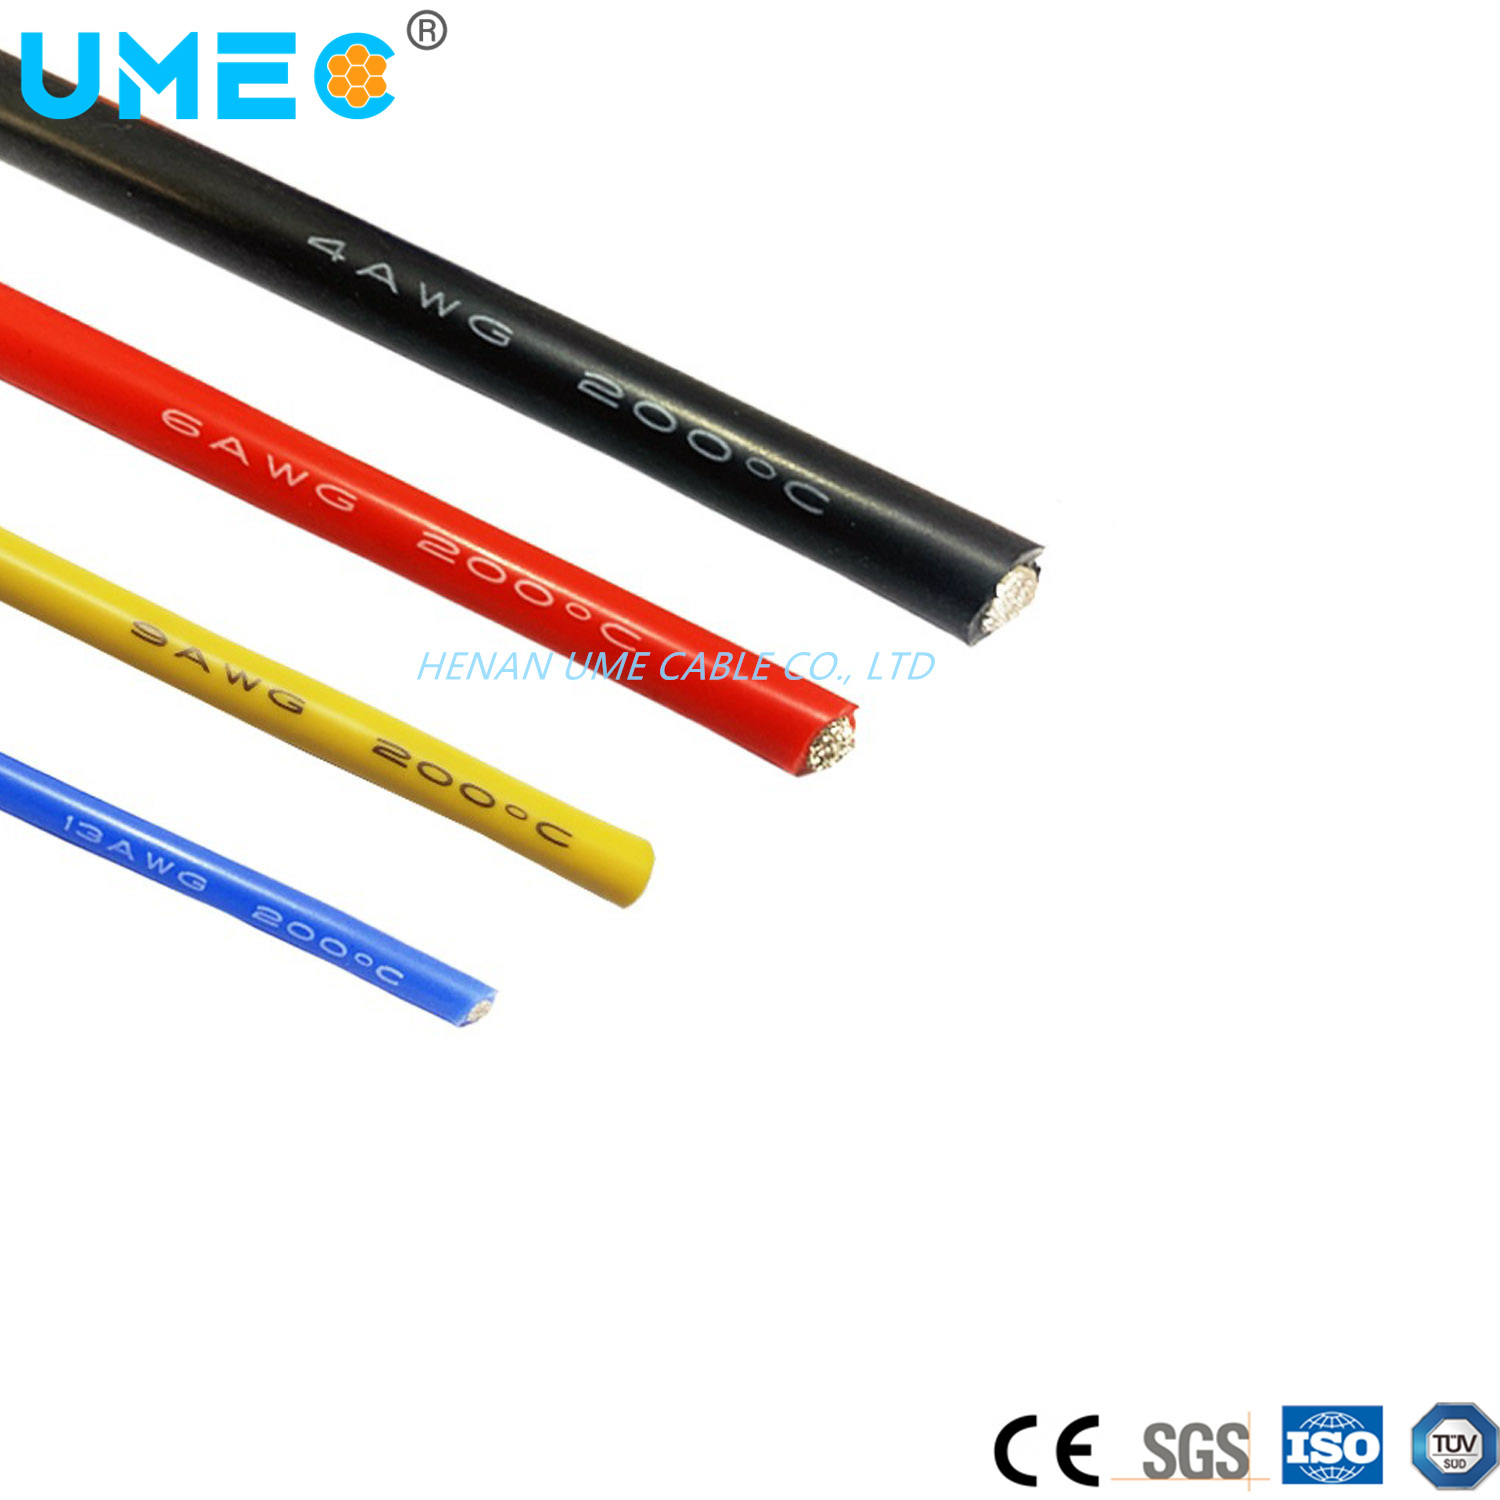 Glass Fiber Braided Fire Resistant Silicone Cable 4 Gauge Silicone Wire Fiberglass Insulated Heater Wire High Temperature Cable